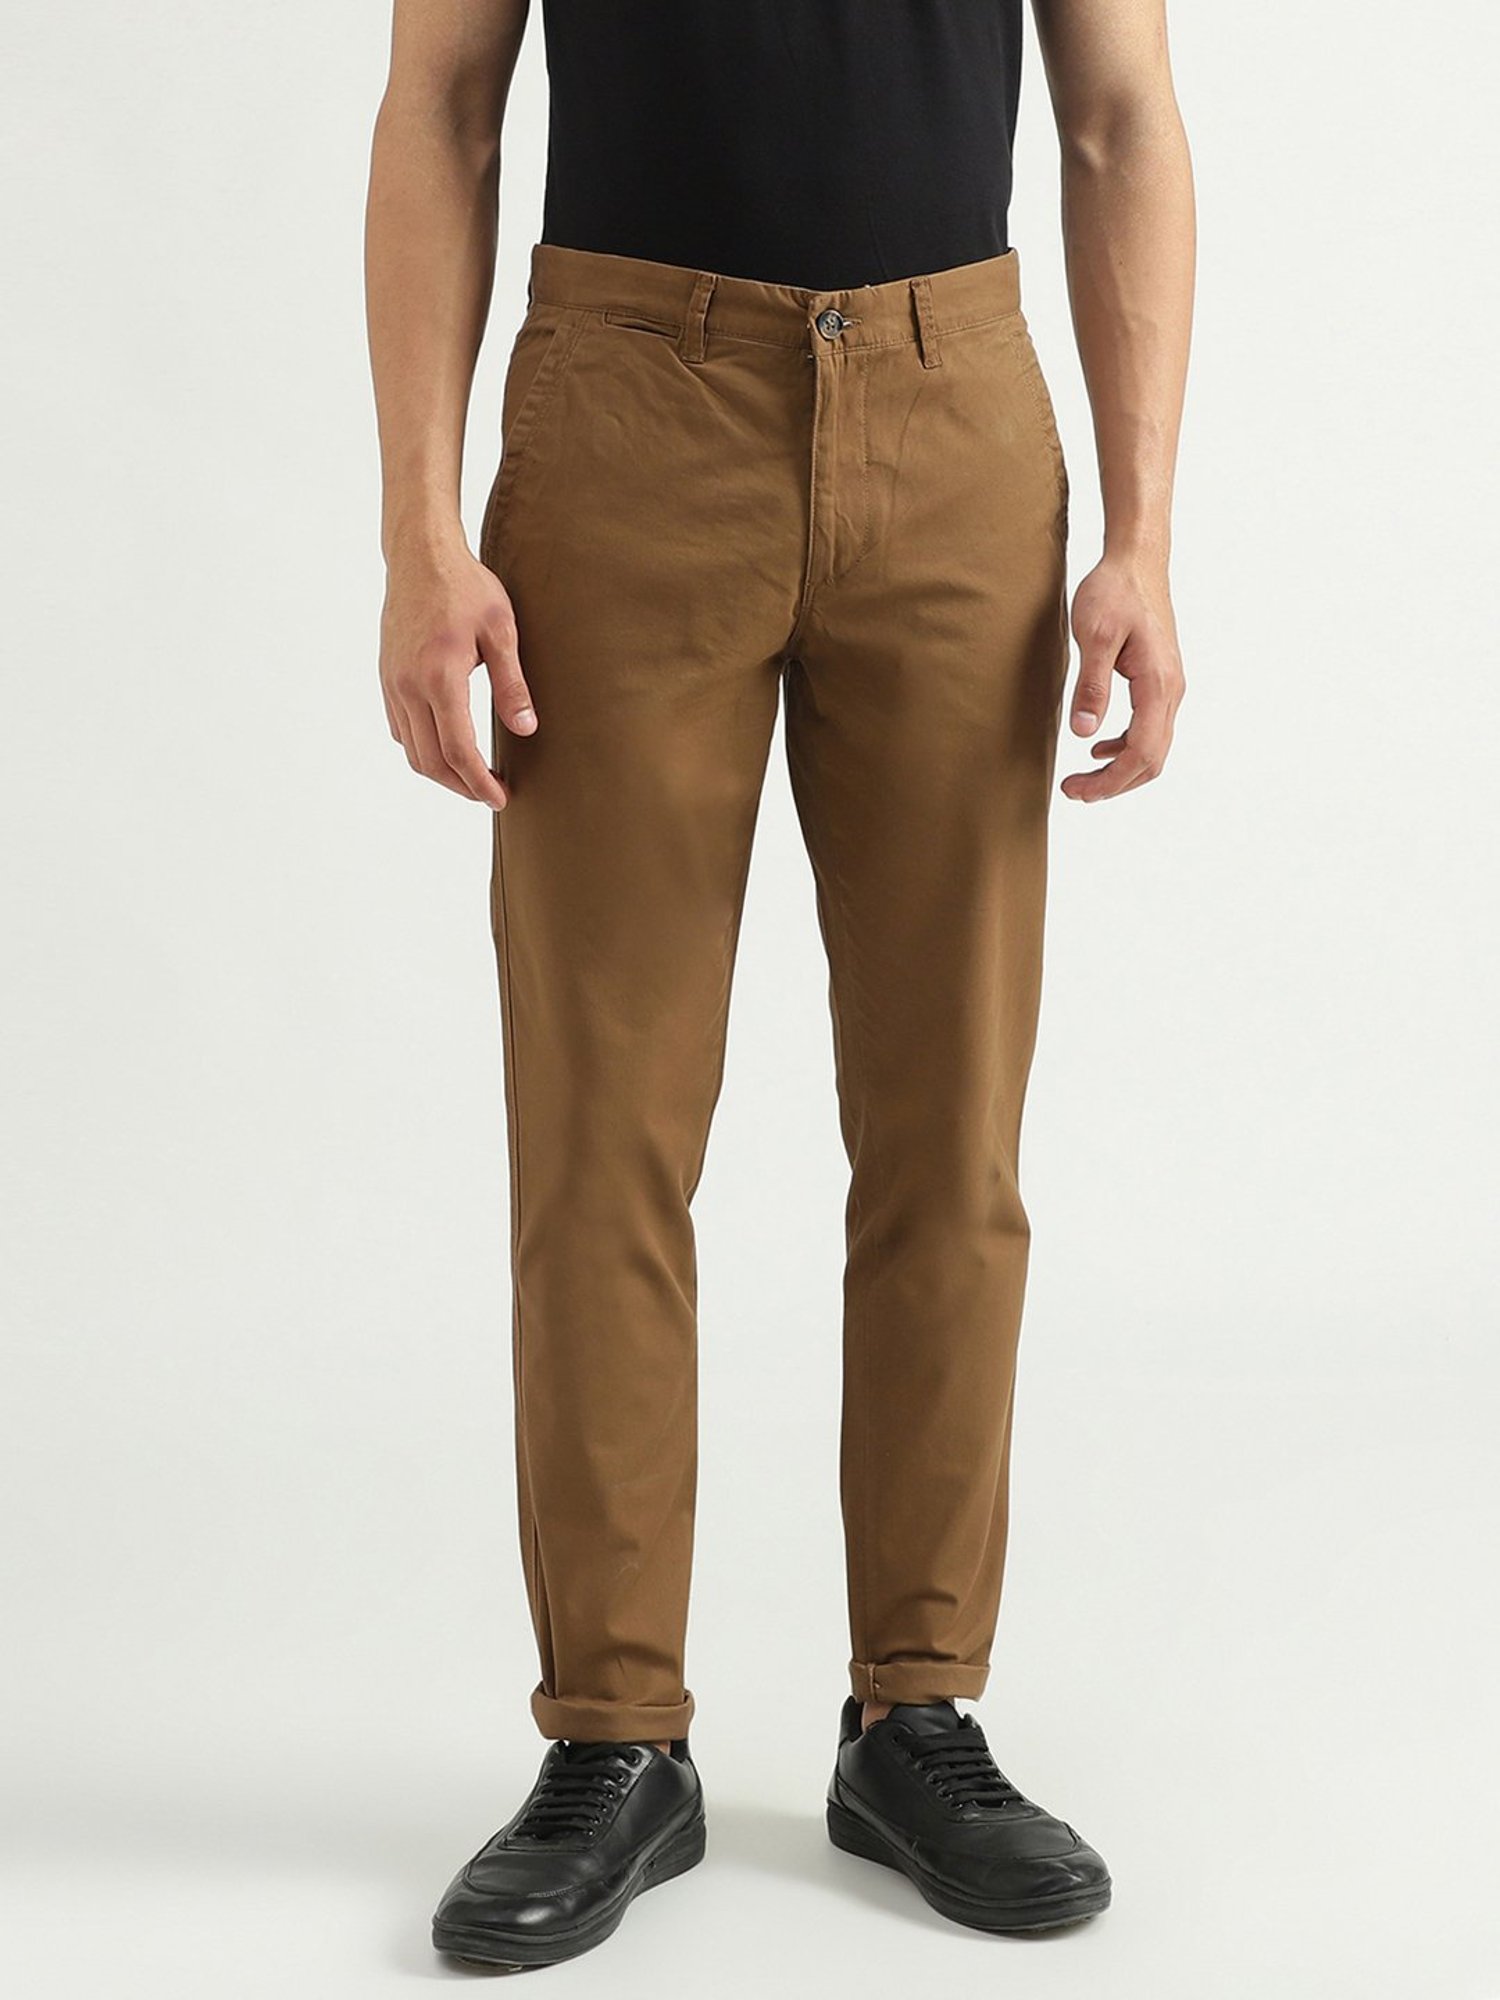 Buy United Colors of Benetton Mens Regular Casual Trousers  8903239828549Blue and Brown42 at Amazonin